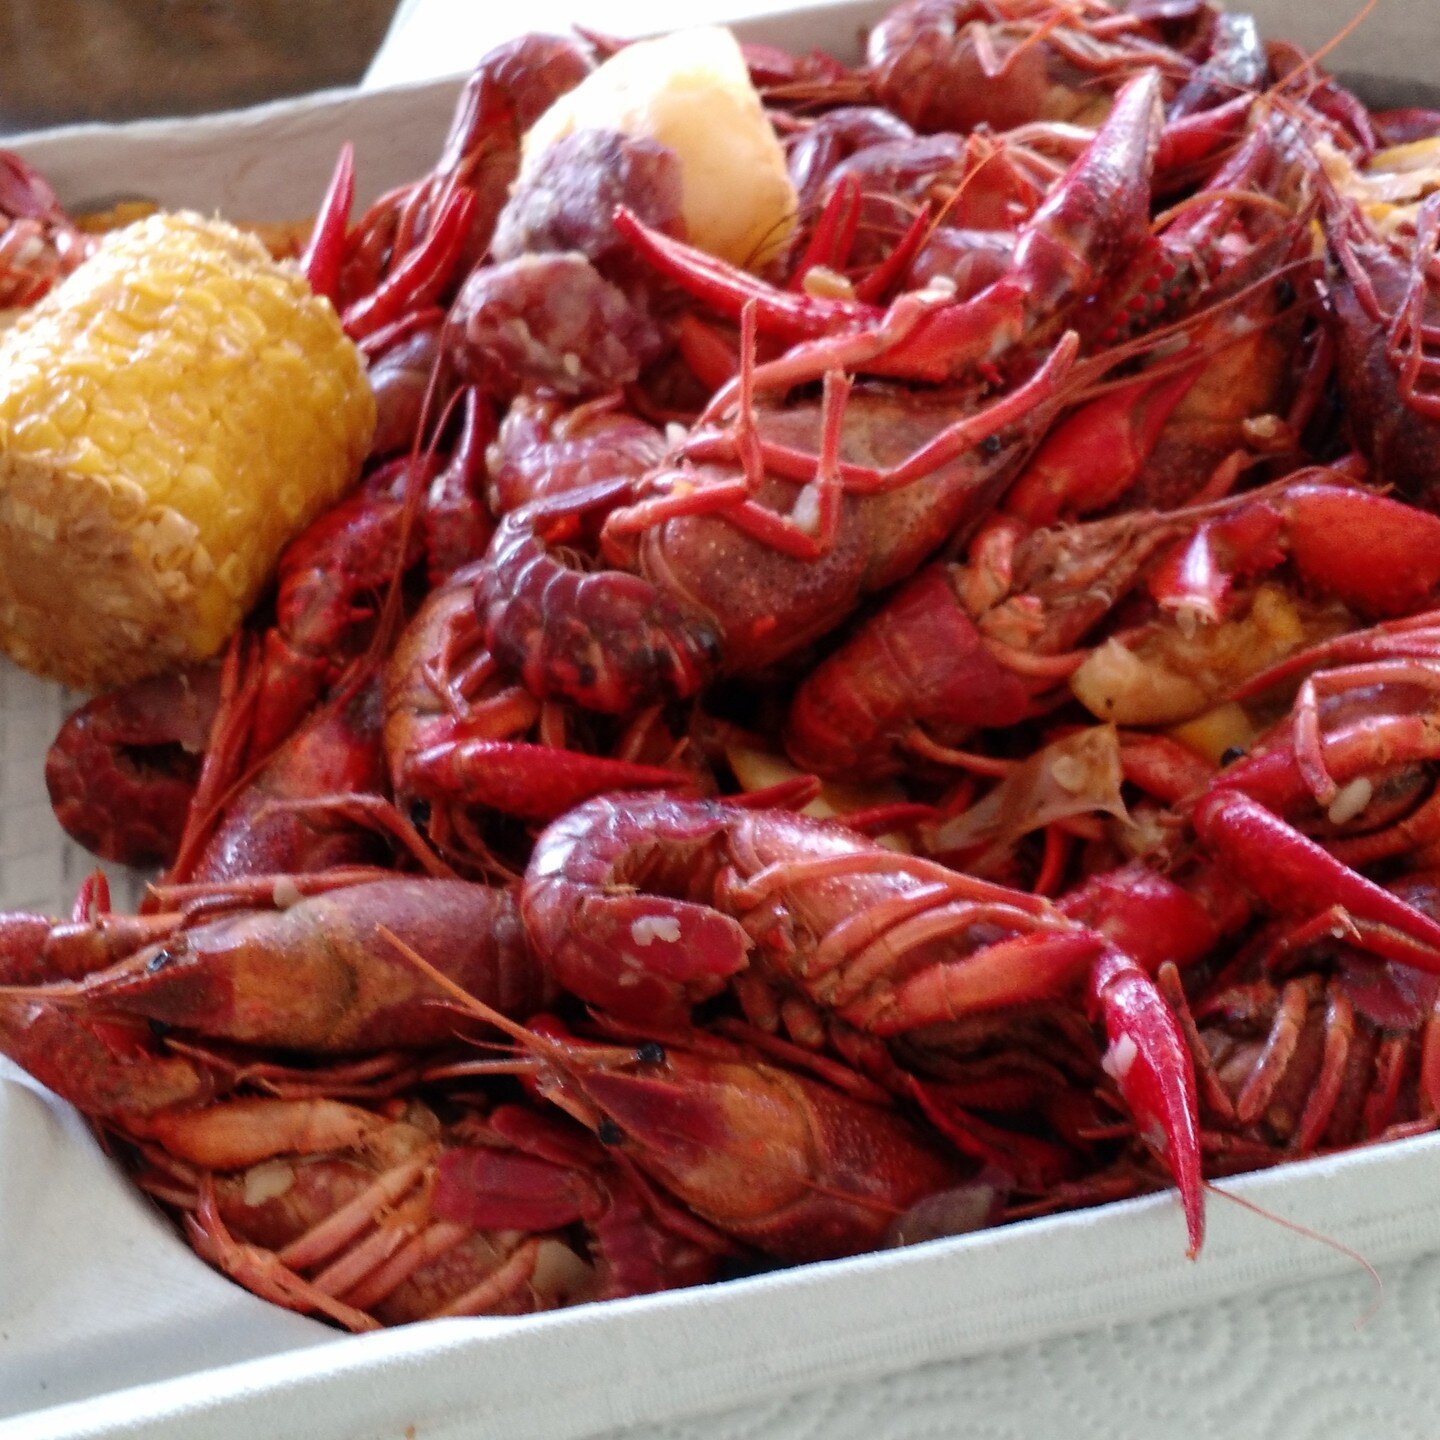 Crawfish in New Orleans, Louisiana USA!

#neworleans #culture #crawfish #seafood